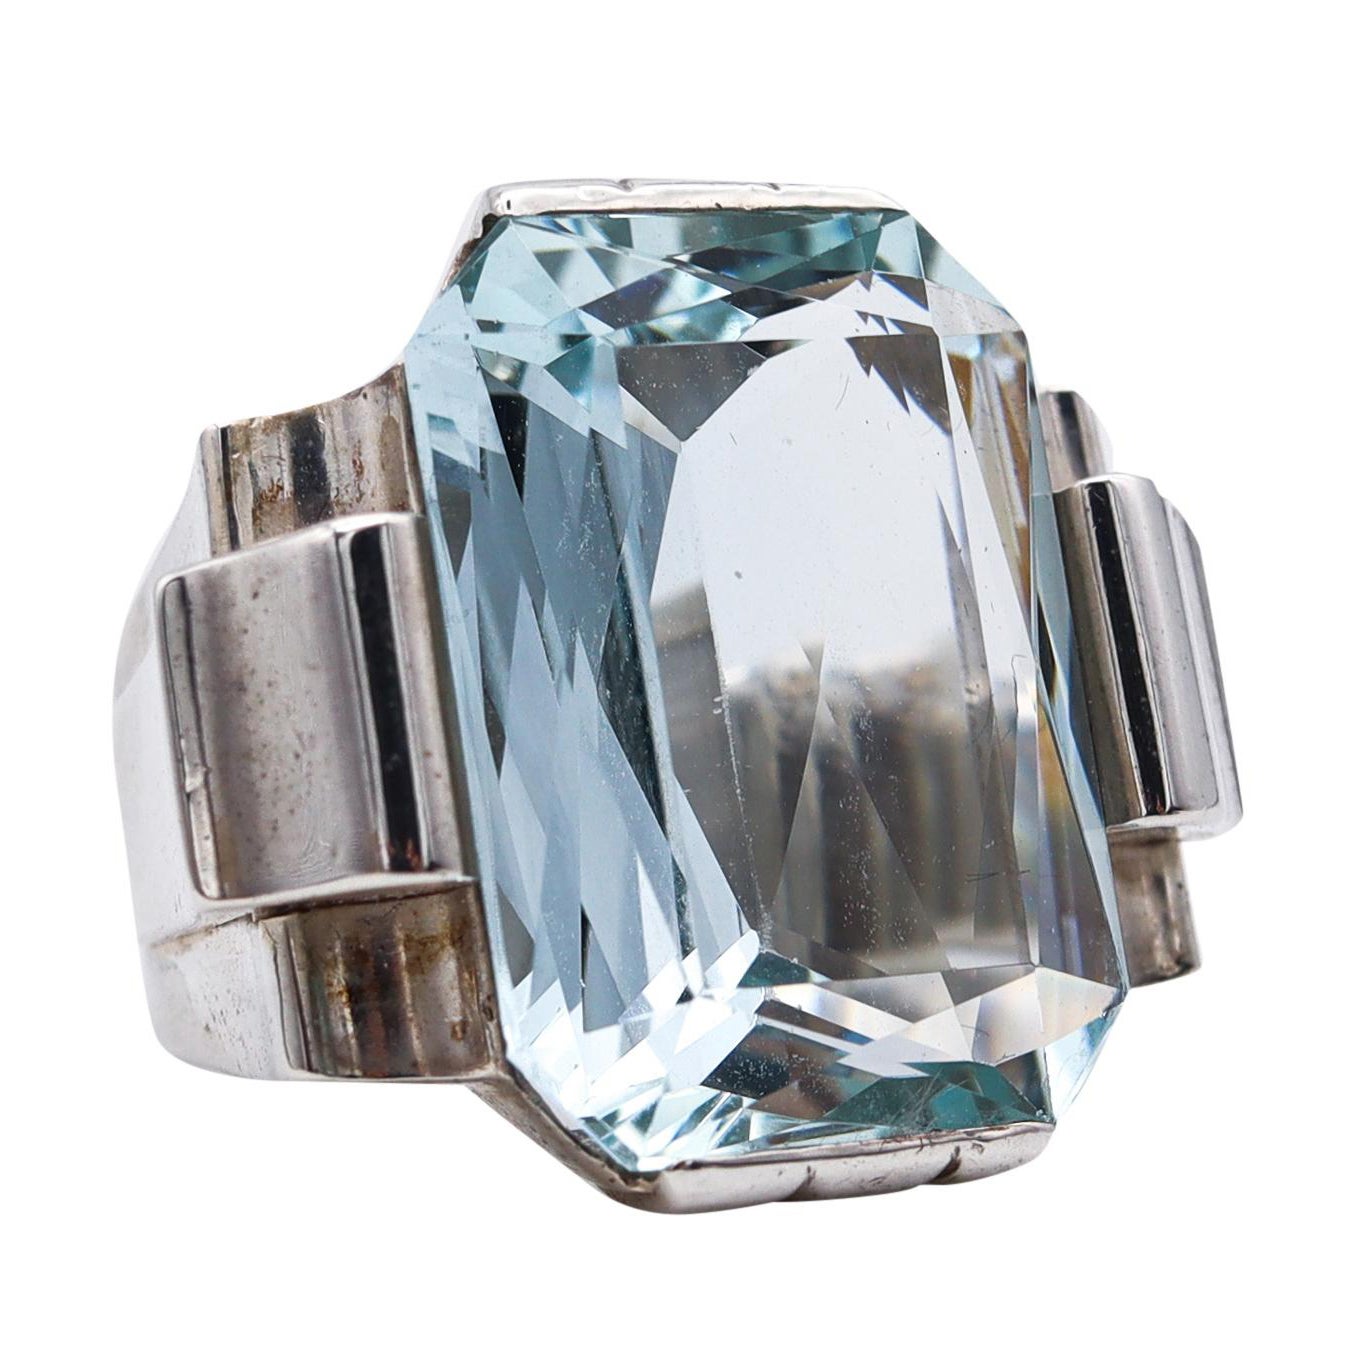 Rene Boivin 1935 Art Deco Geometric Ring in Sterling Silver 27.66 Cts Aquamarine